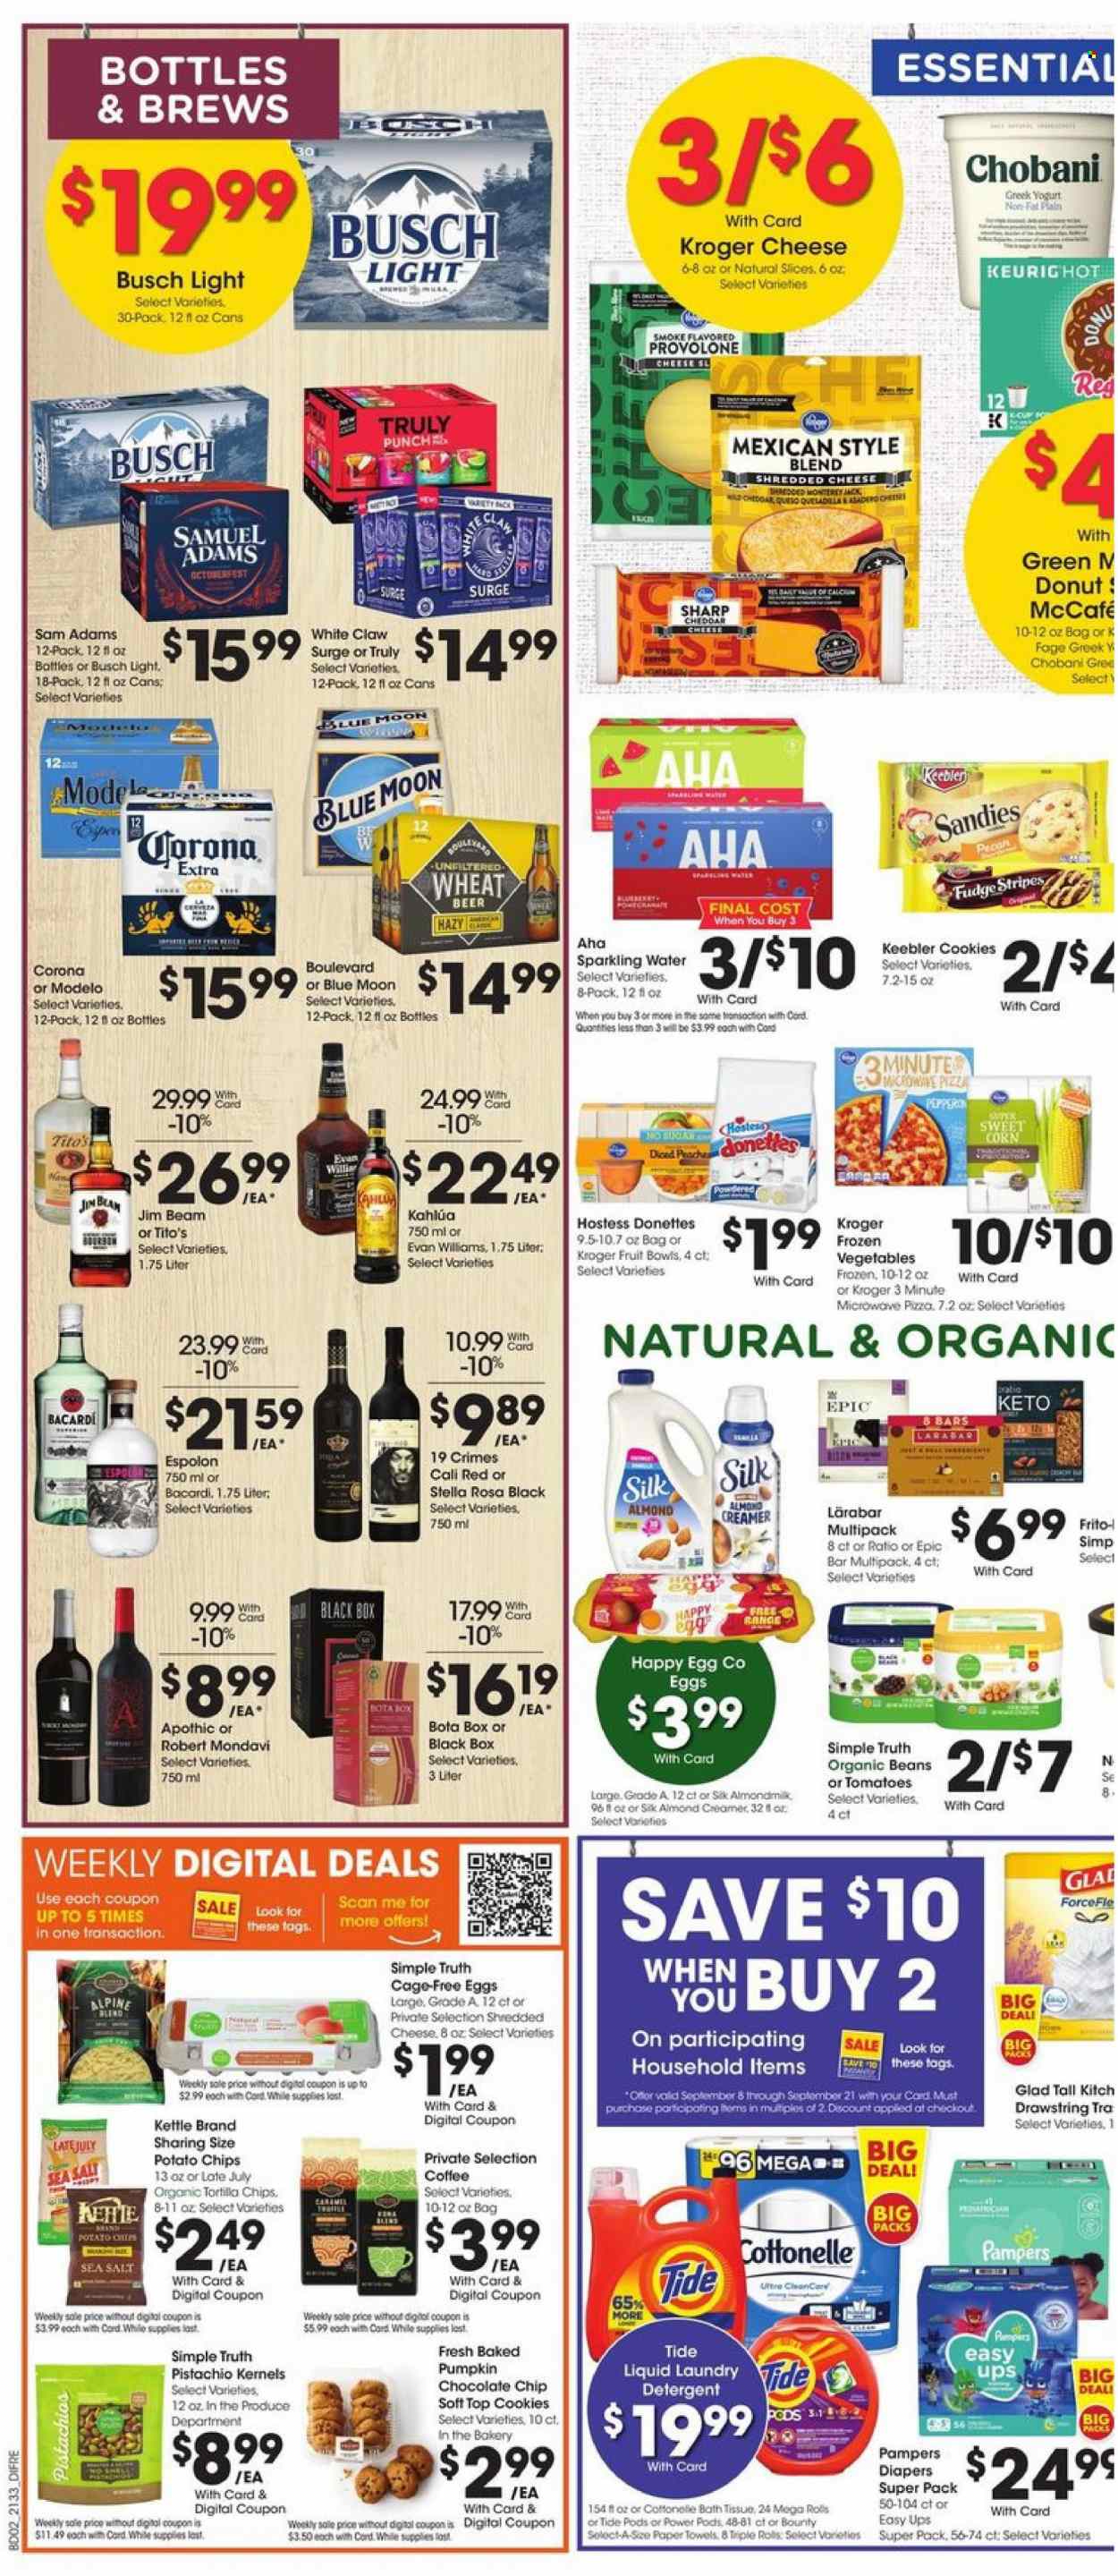 thumbnail - Baker's Flyer - 09/15/2021 - 09/21/2021 - Sales products - corn, pumpkin, sweet corn, pizza, shredded cheese, Provolone, greek yoghurt, yoghurt, Chobani, almond milk, Silk, eggs, cage free eggs, creamer, almond creamer, cookies, fudge, Bounty, Keebler, tortilla chips, potato chips, pistachios, sparkling water, coffee, Kahlúa, McCafe, Bacardi, Jim Beam, White Claw, TRULY, beer, Busch, Corona Extra, Modelo, Pampers, nappies, bath tissue, Cottonelle, kitchen towels, paper towels, detergent, Tide, Shell, Blue Moon, peaches. Page 5.